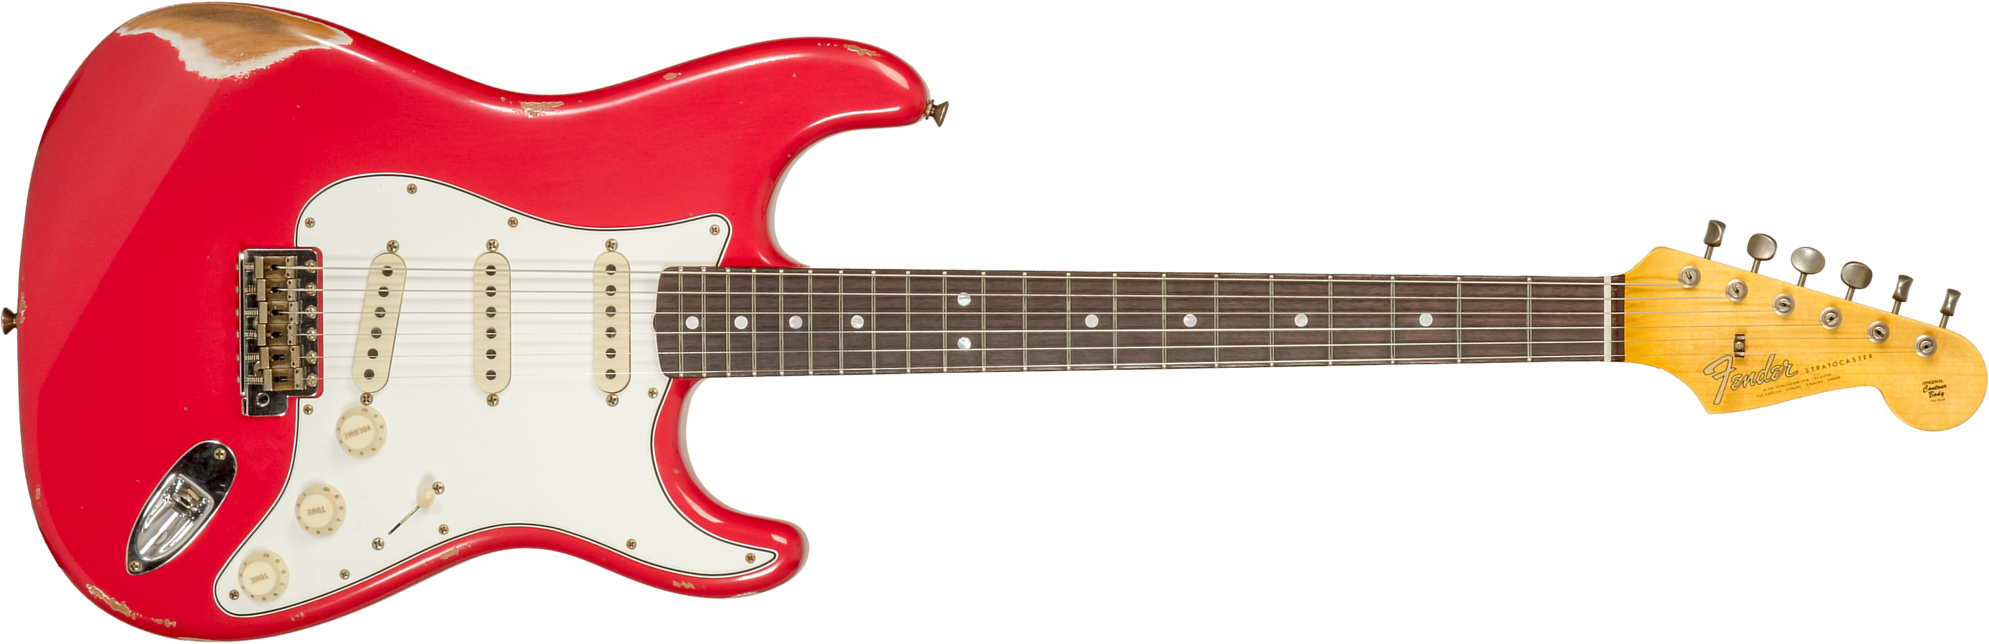 Fender Custom Shop Strat Late 1964 Trem 3s Rw #cz575557 - Relic Aged Fiesta Red - Str shape electric guitar - Main picture